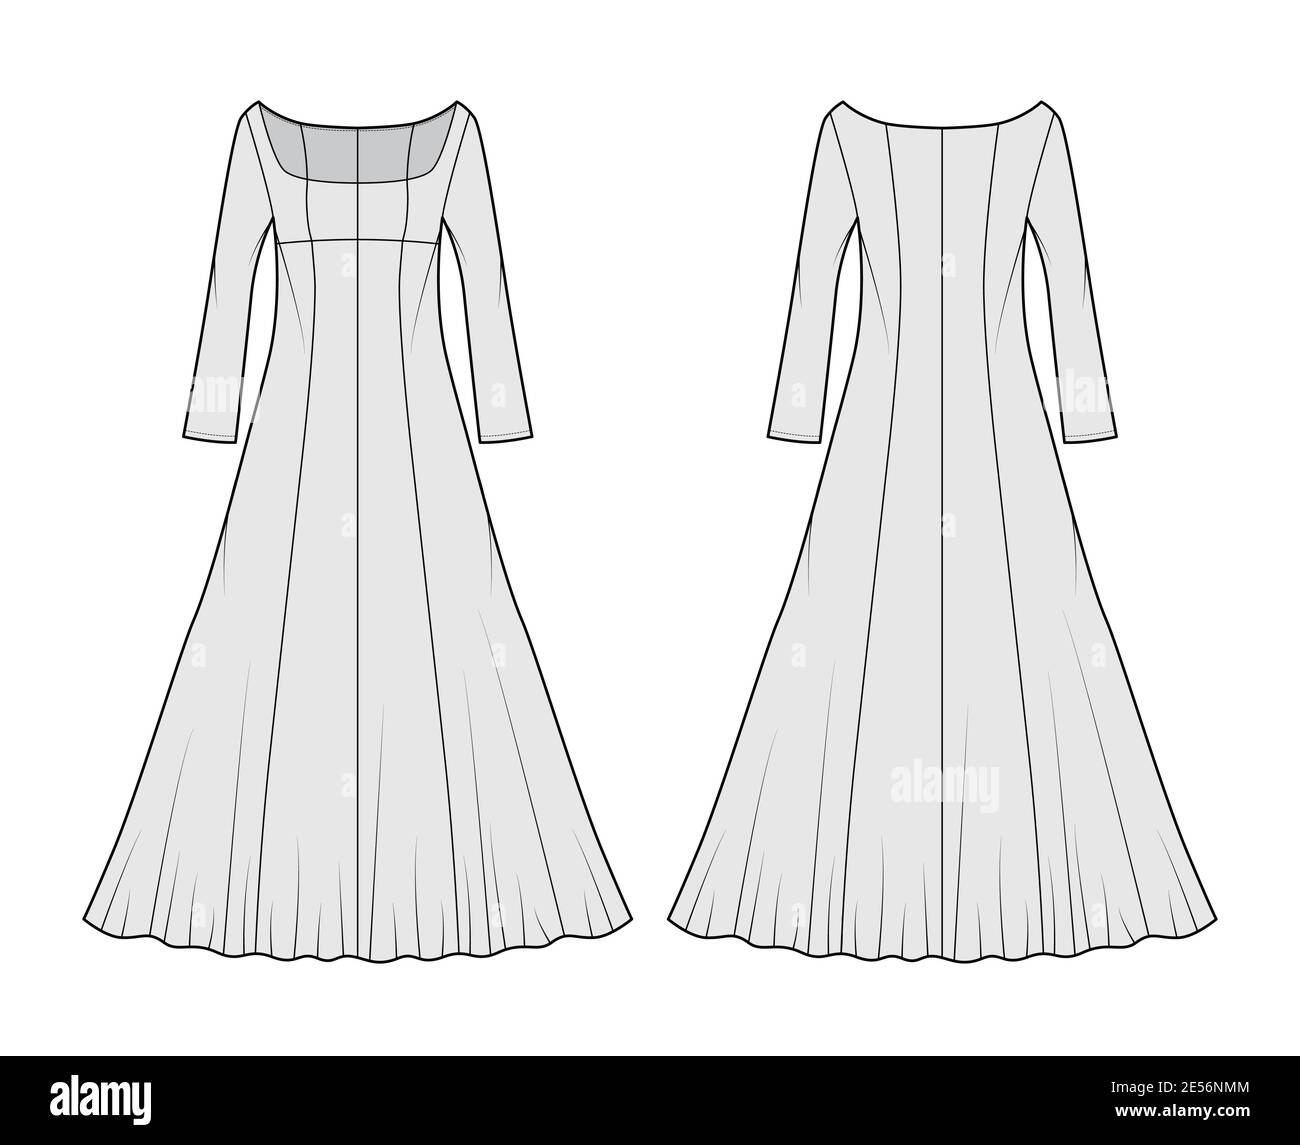 Dress evening technical fashion illustration with scoop neck, maxi ...